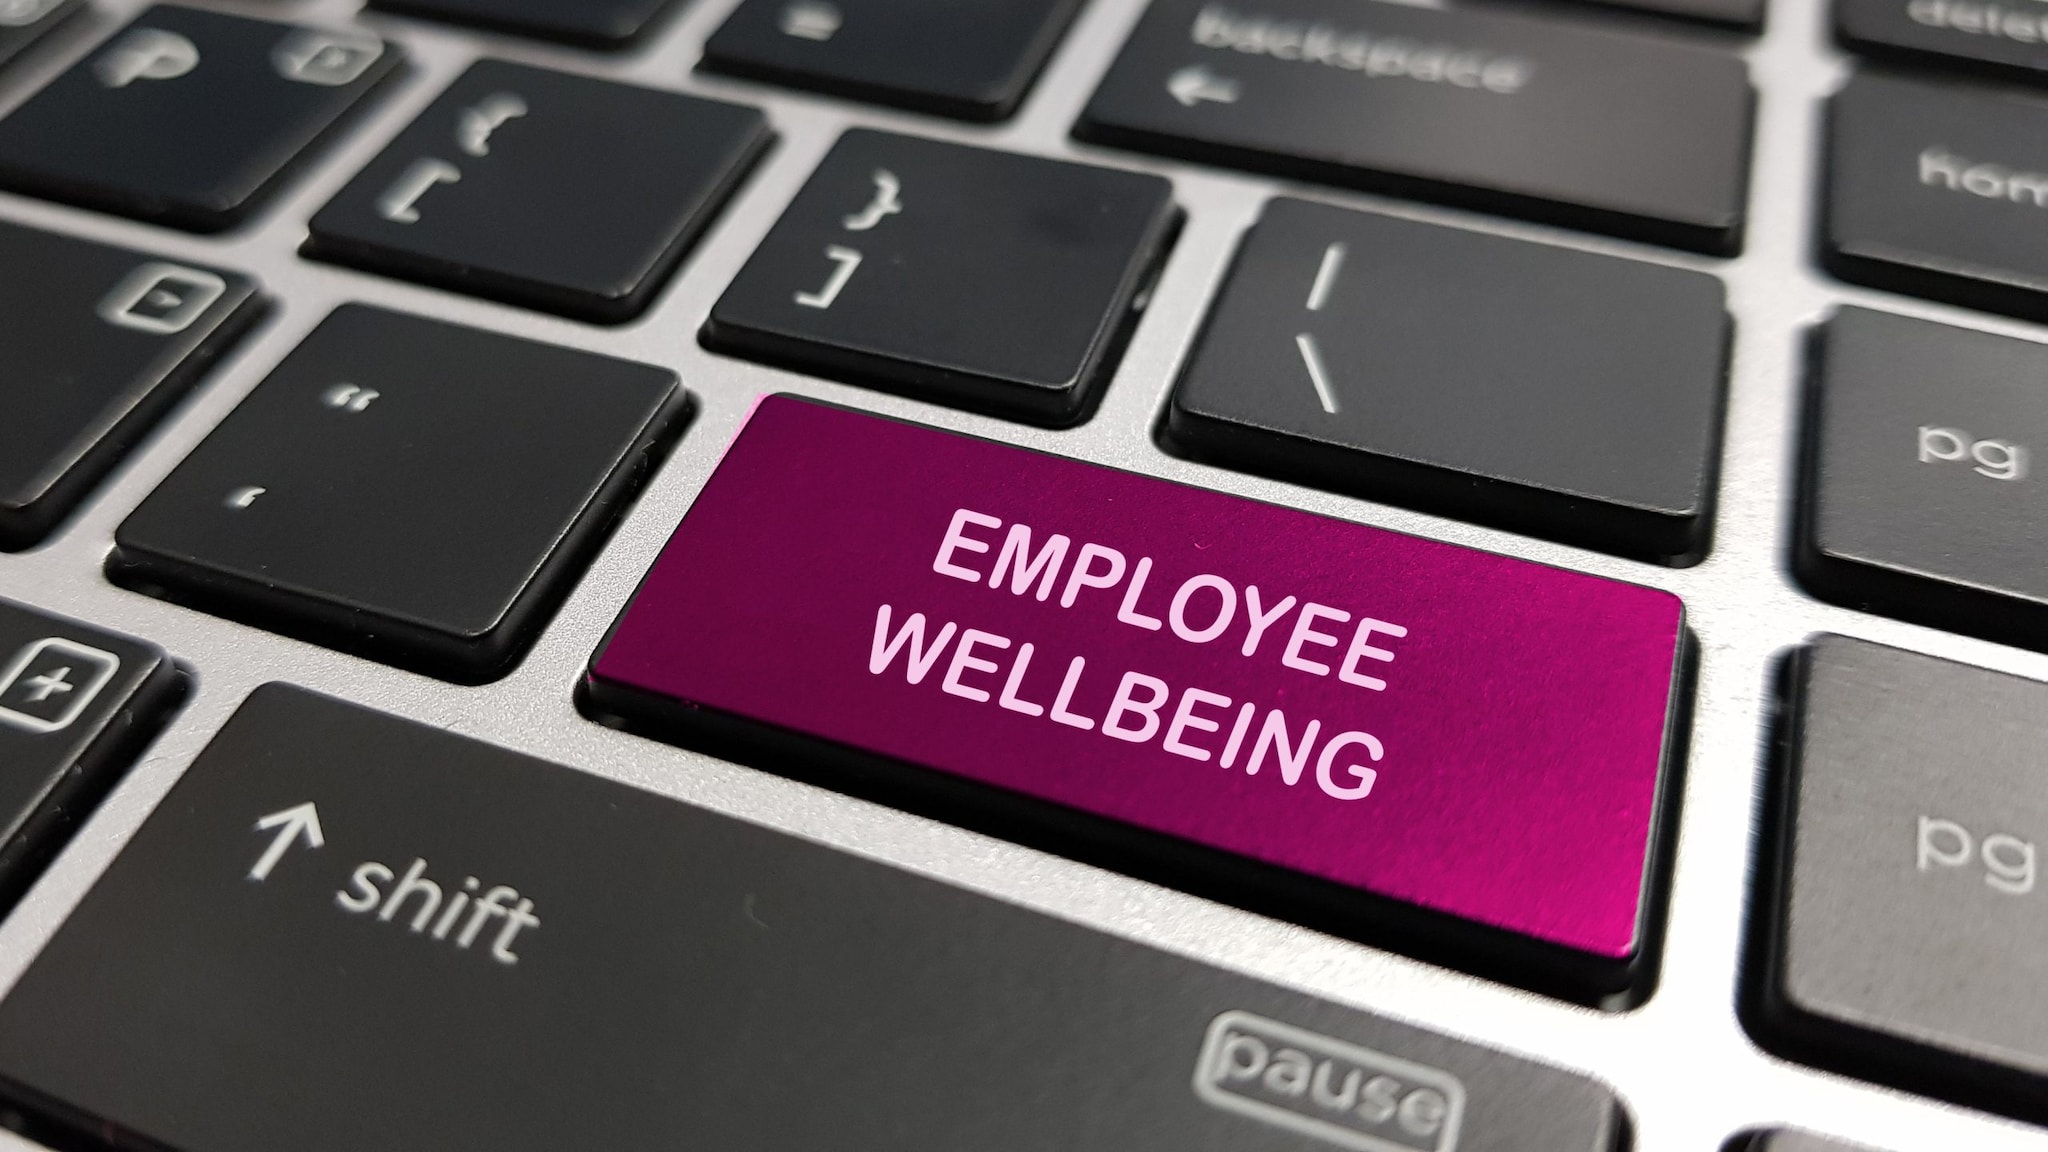 A keyboard key with the words "Employee Wellbeing".